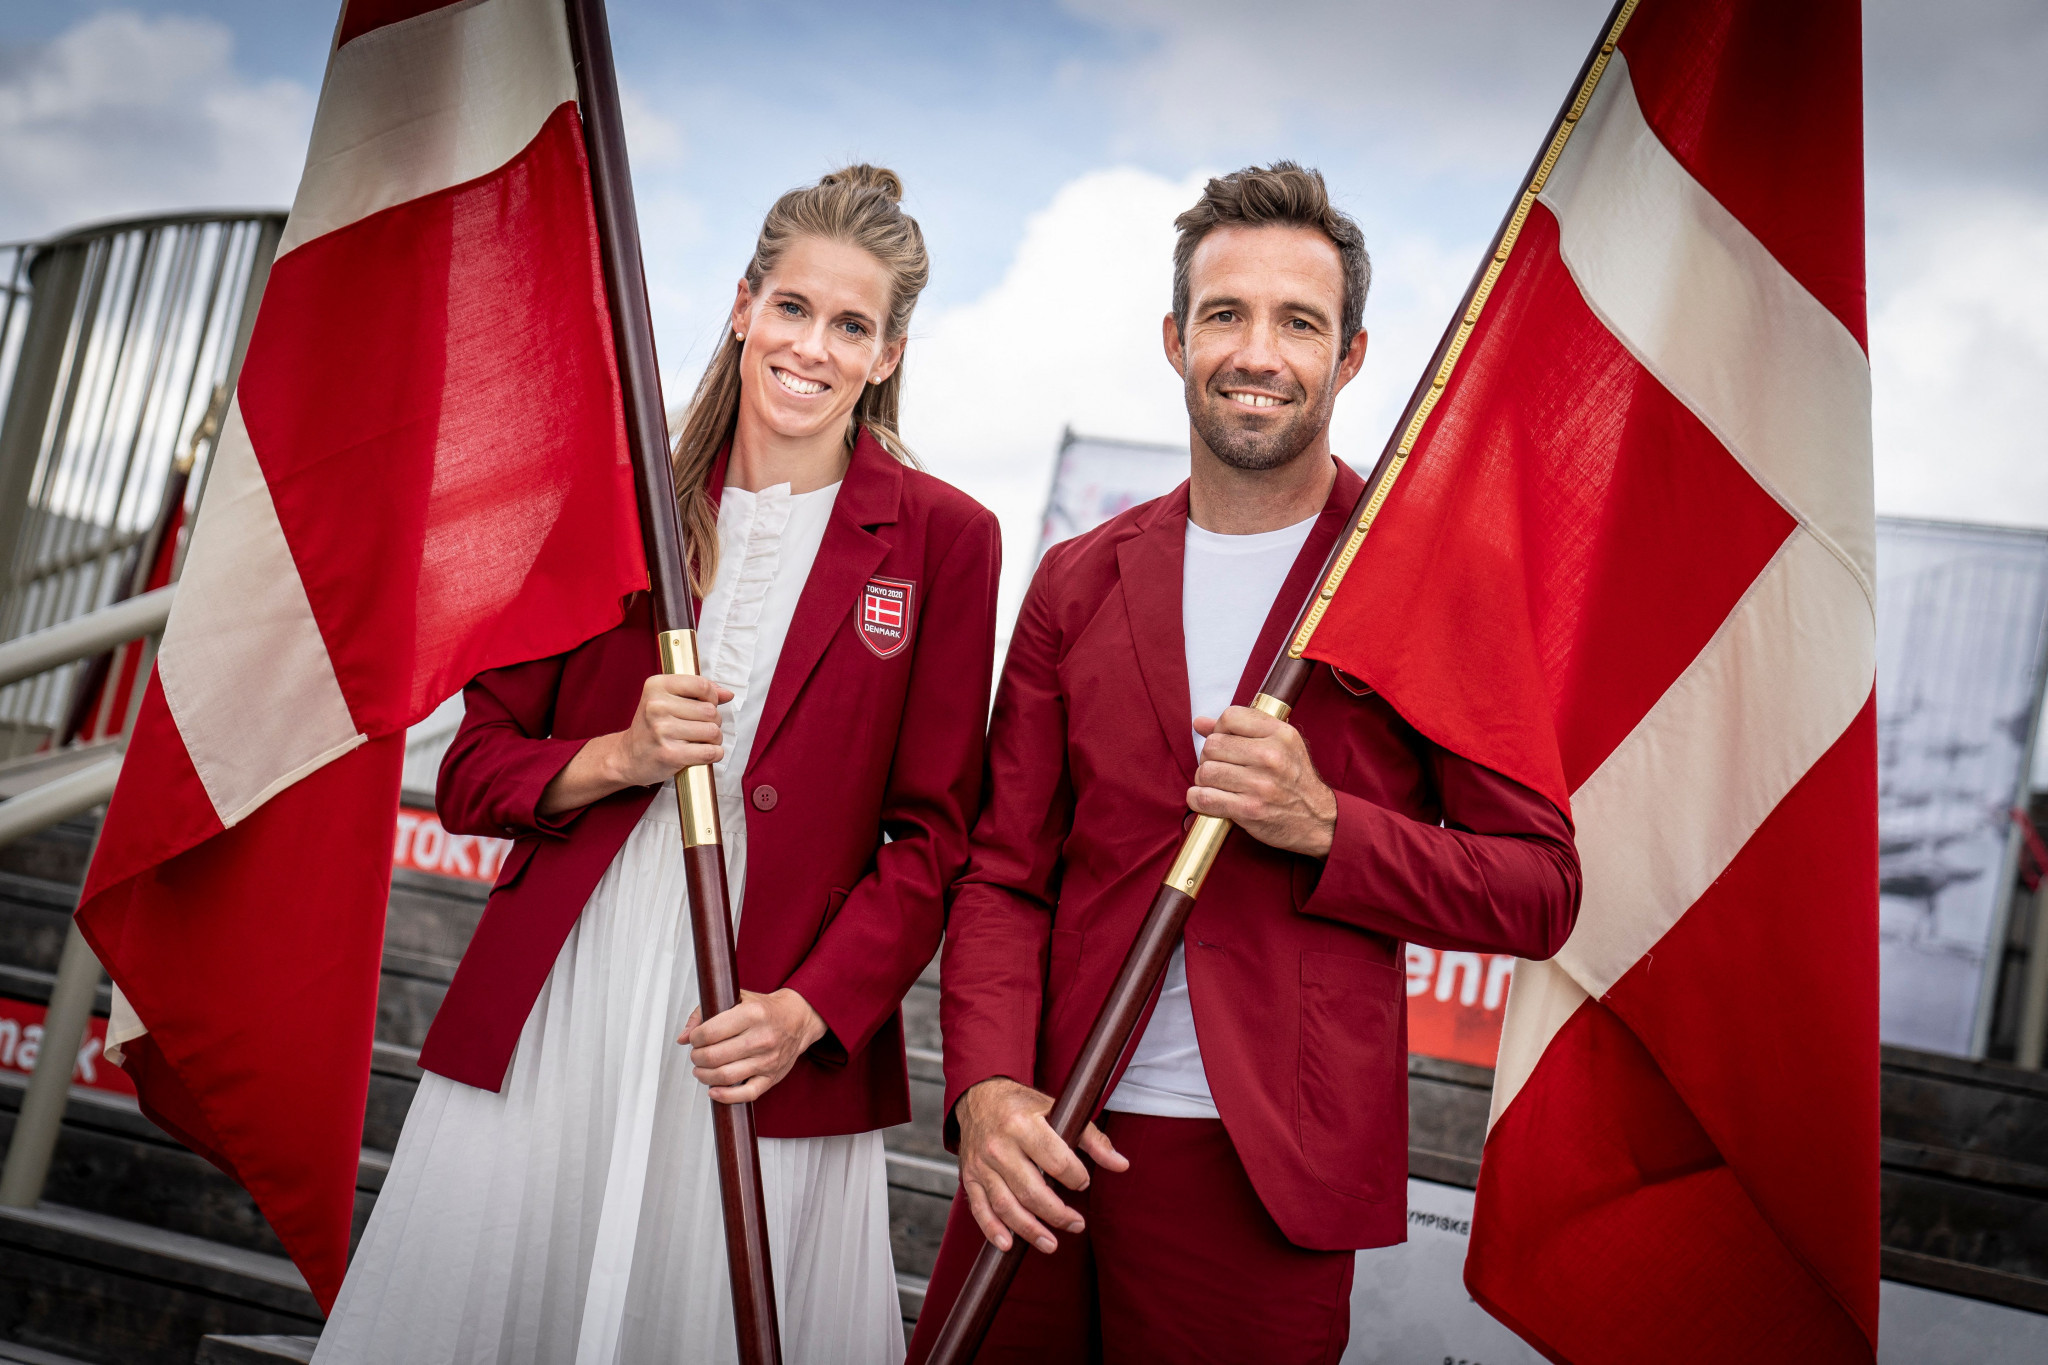 Warrer and Petersen named as Denmark's flagbearers for Tokyo 2020